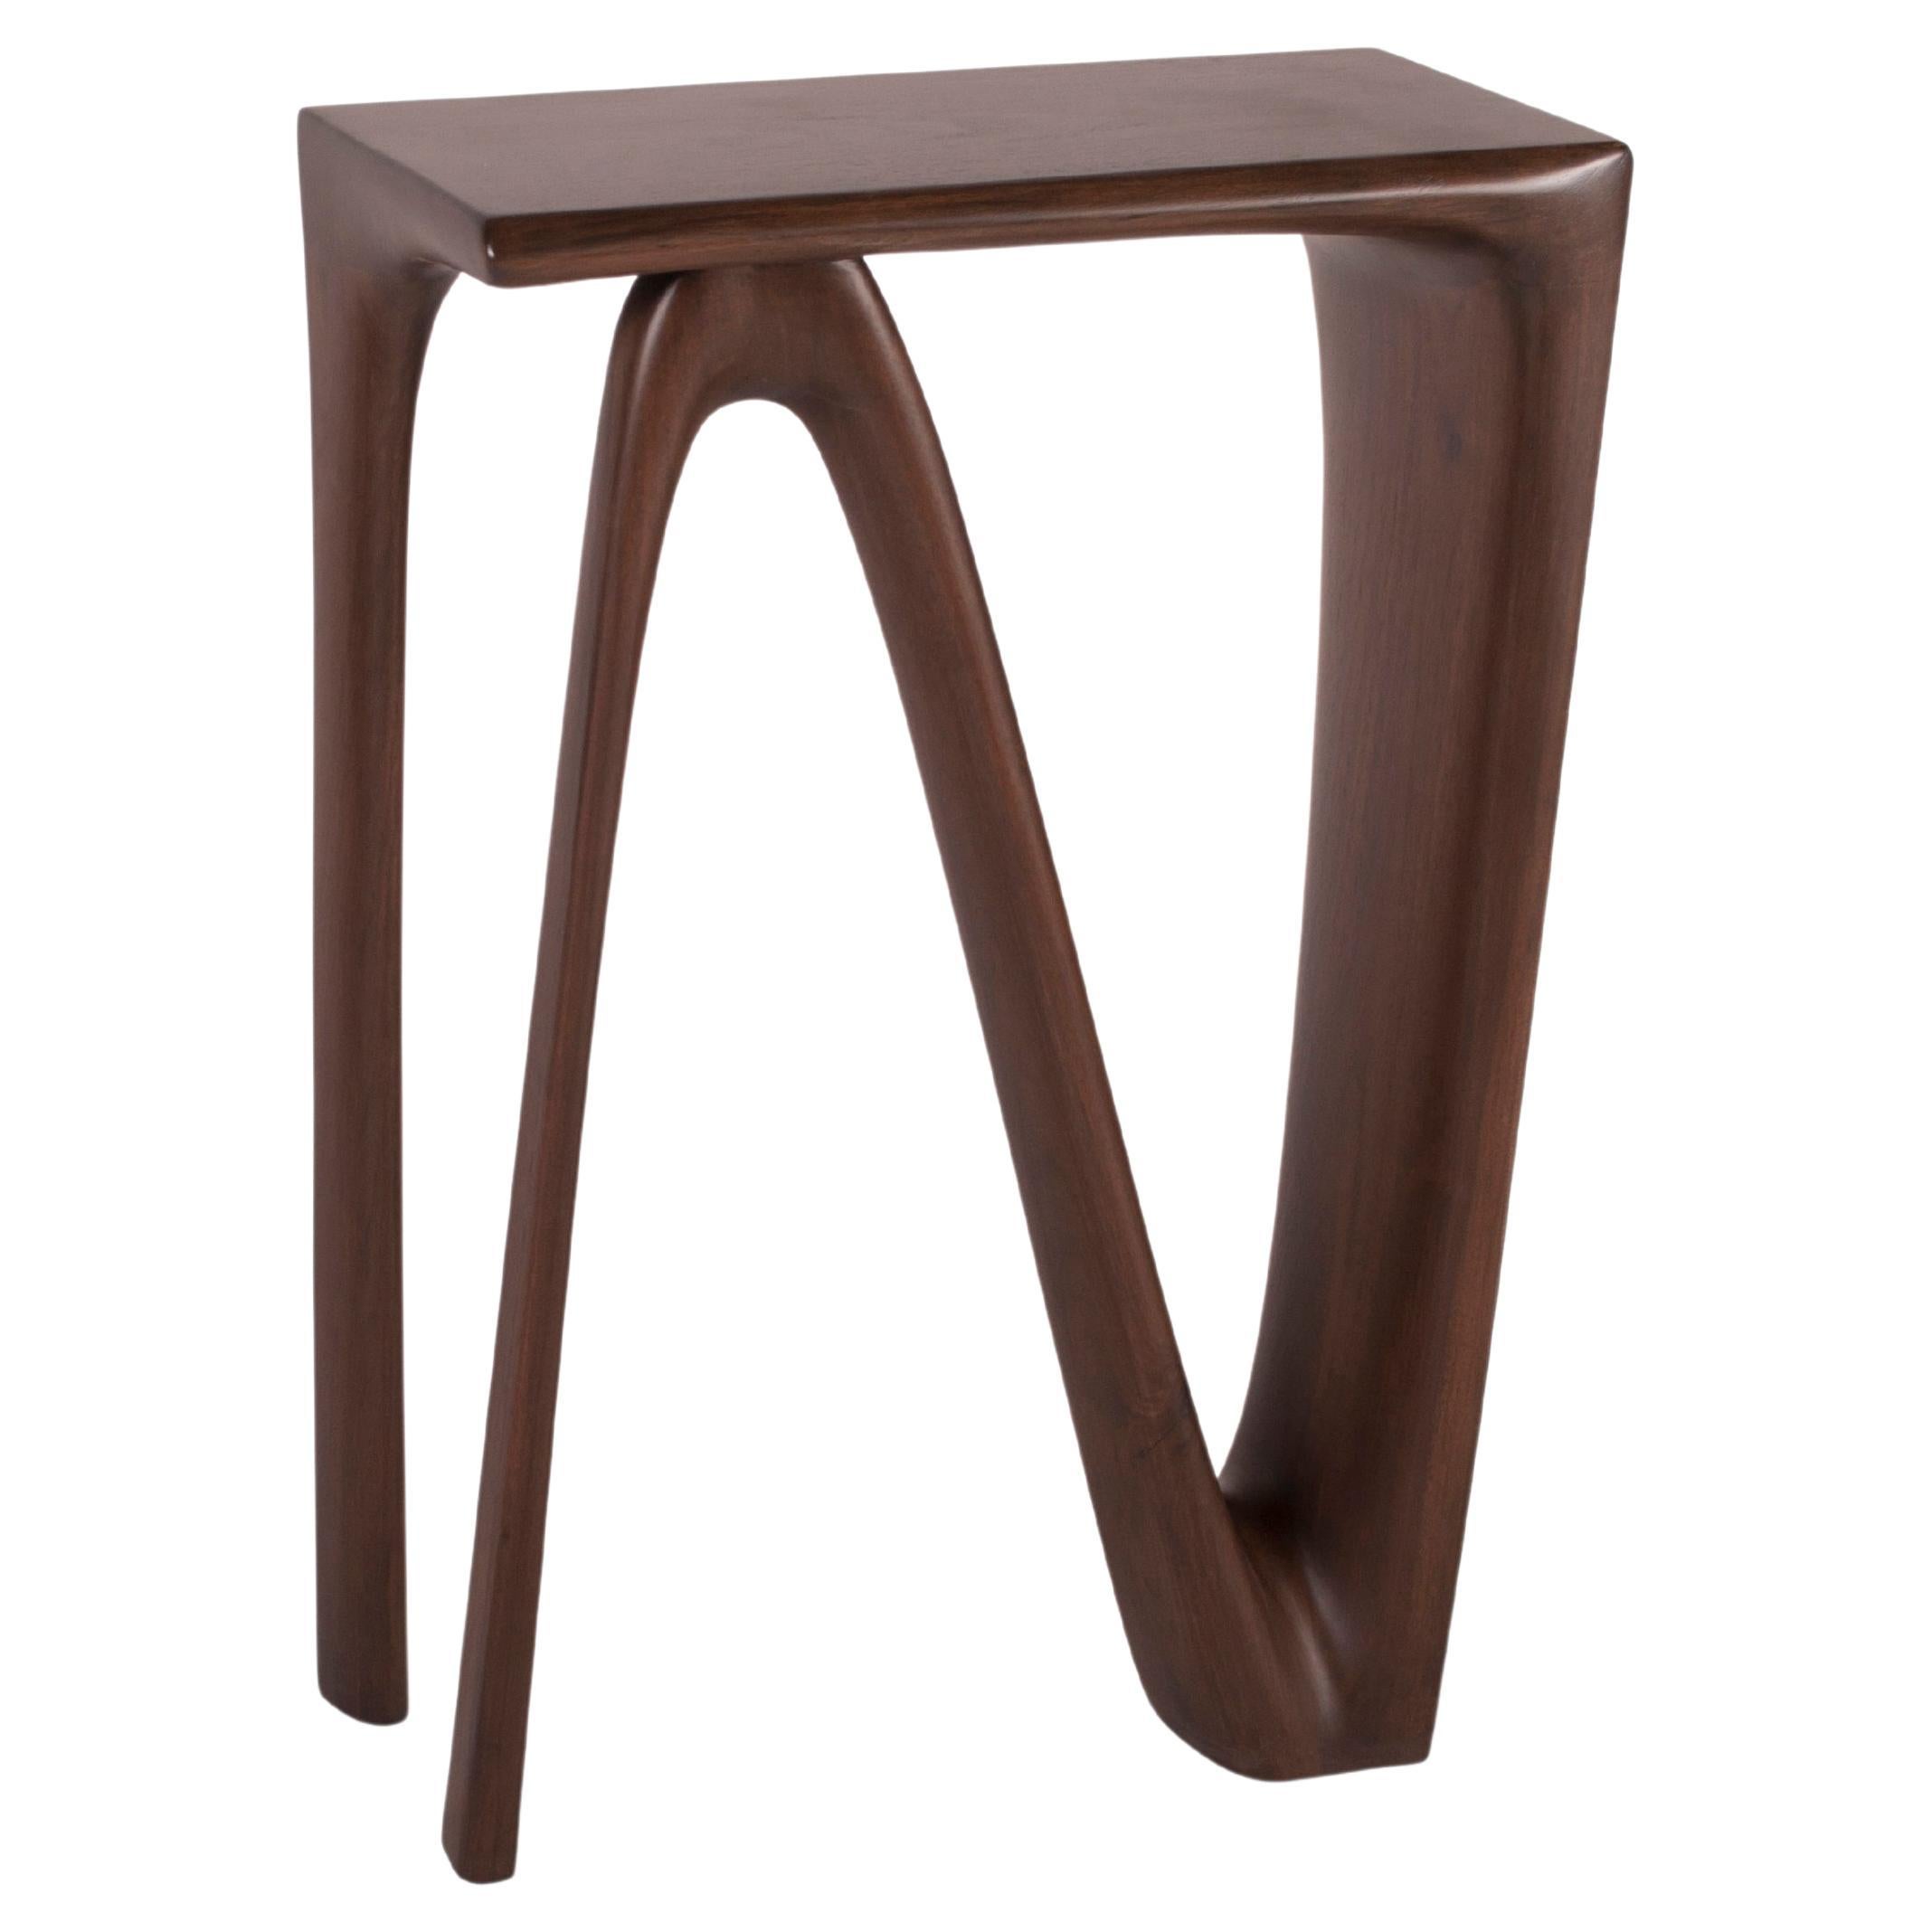 Amorph Astra Console Table Montana stain on Walnut wood